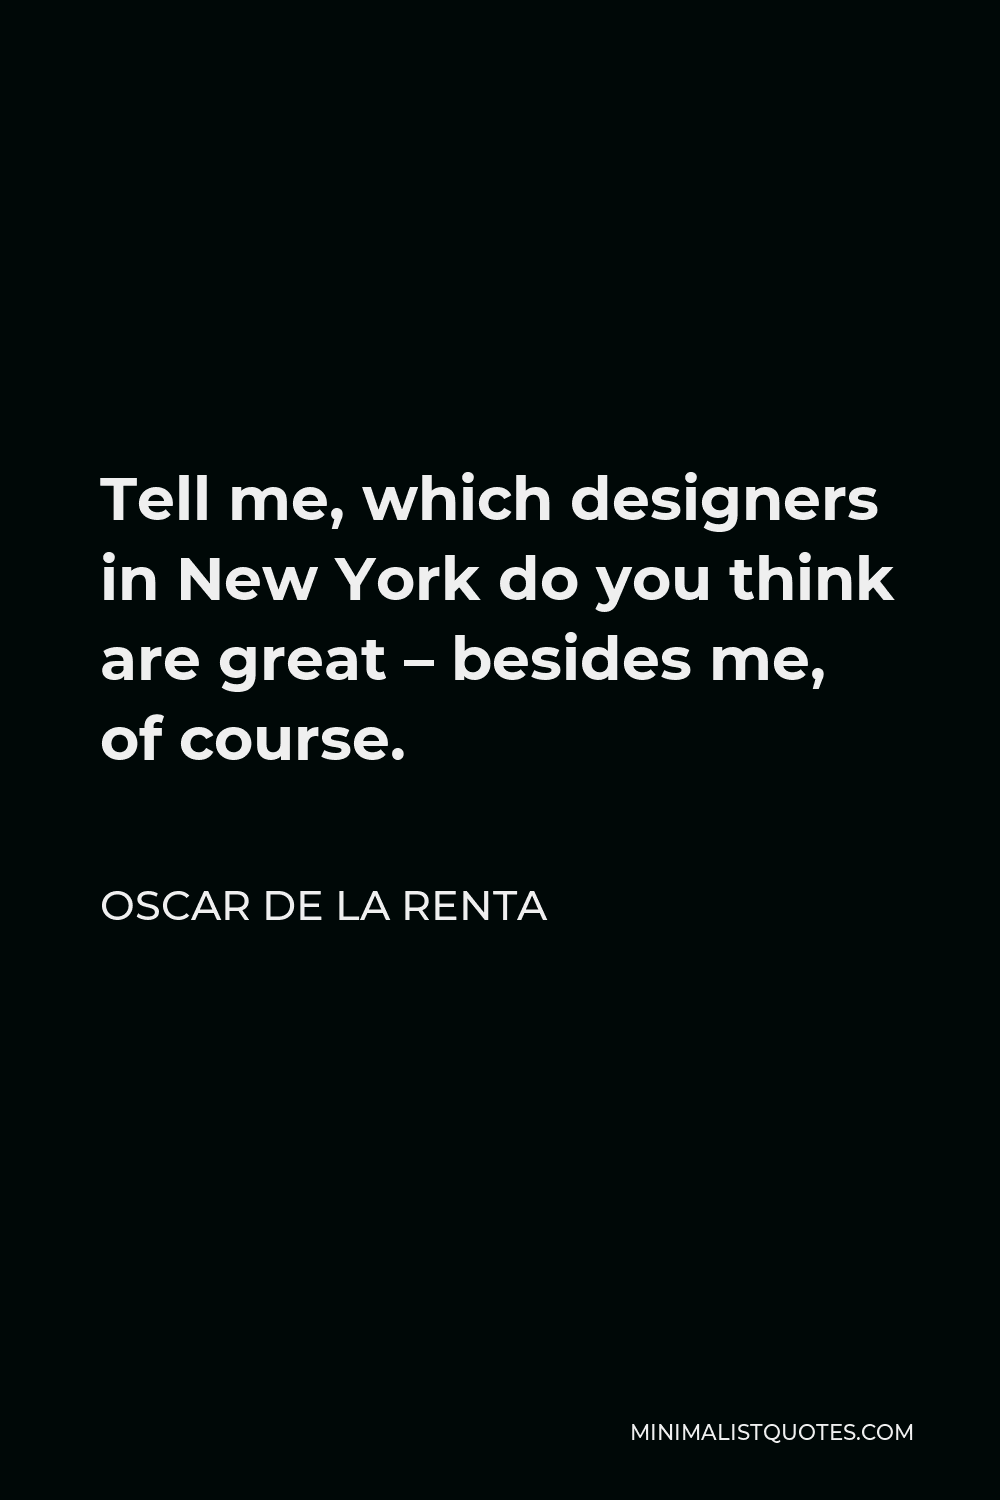 Oscar de la Renta Quote - Tell me, which designers in New York do you think are great – besides me, of course.